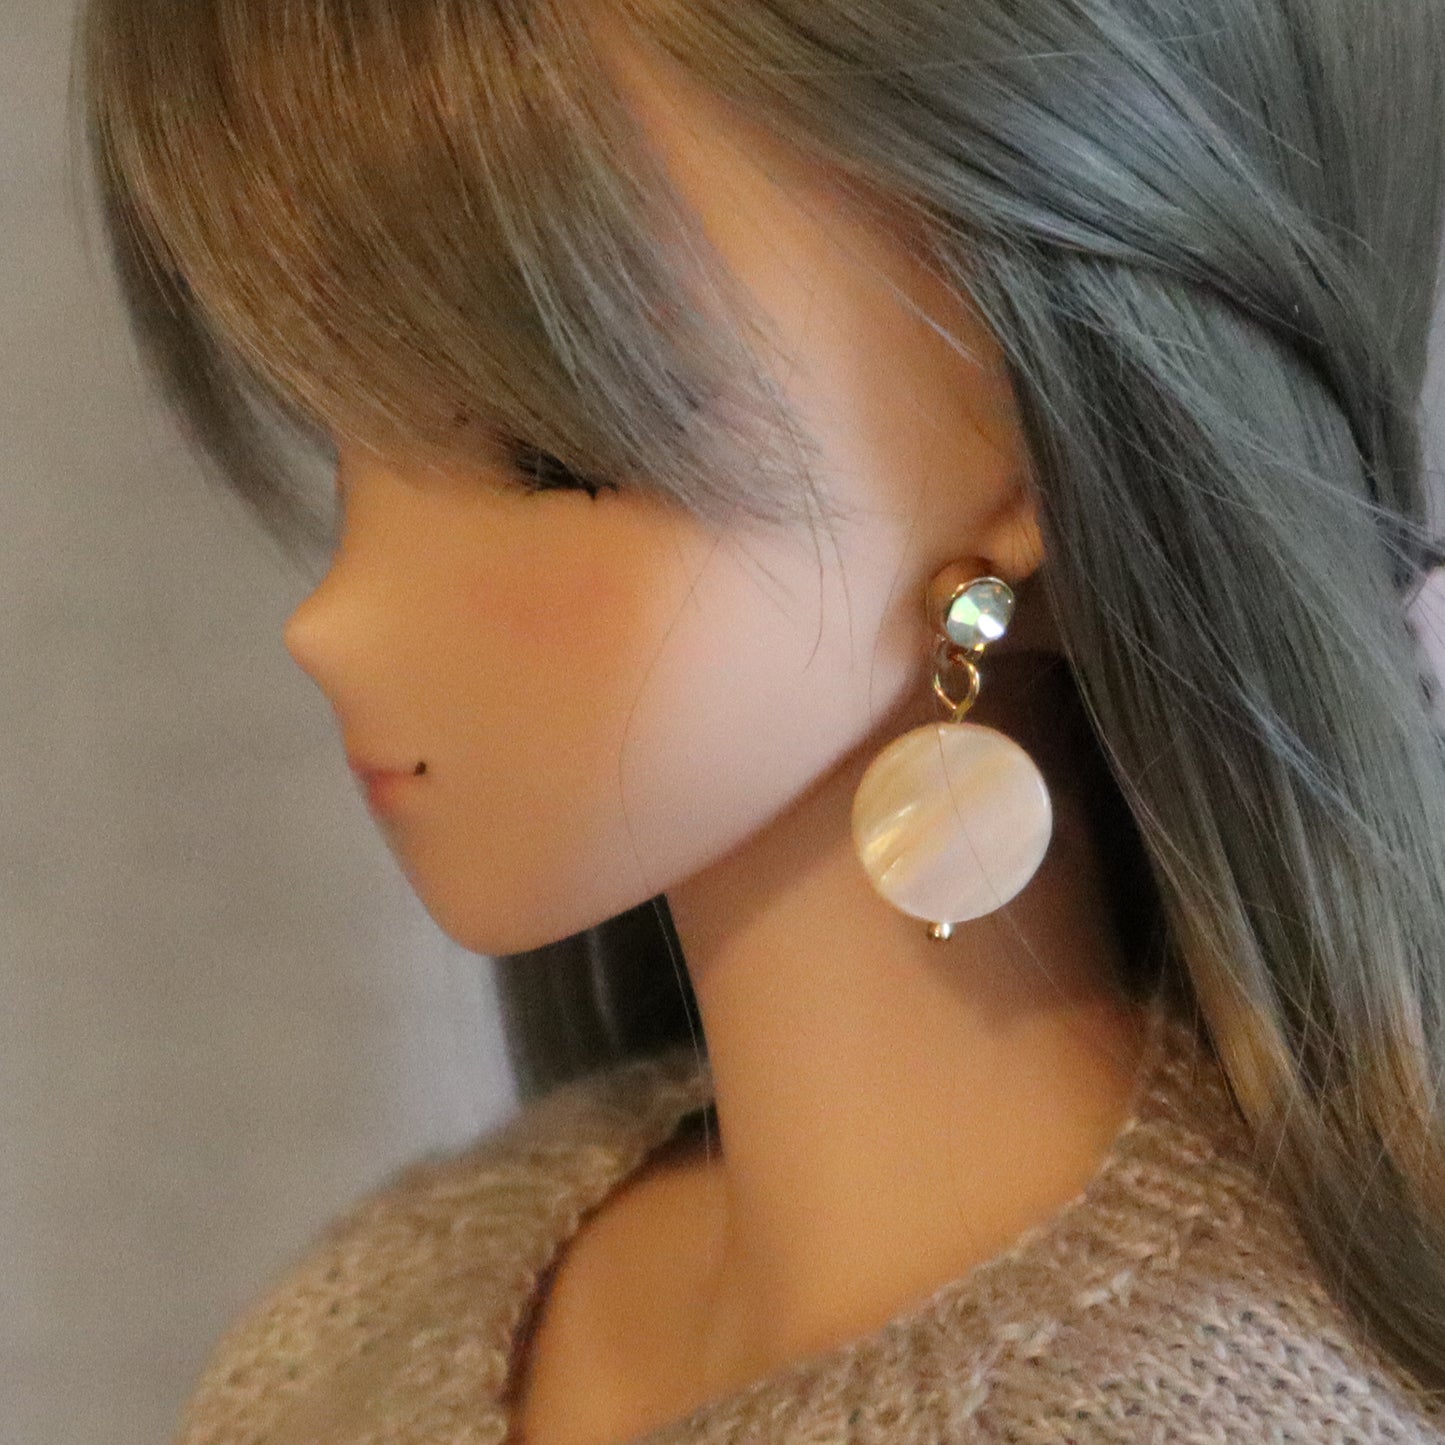 No-Hole Earrings for Vinyl Dolls - Mother of Pearl Discs (Moon or Tiger)